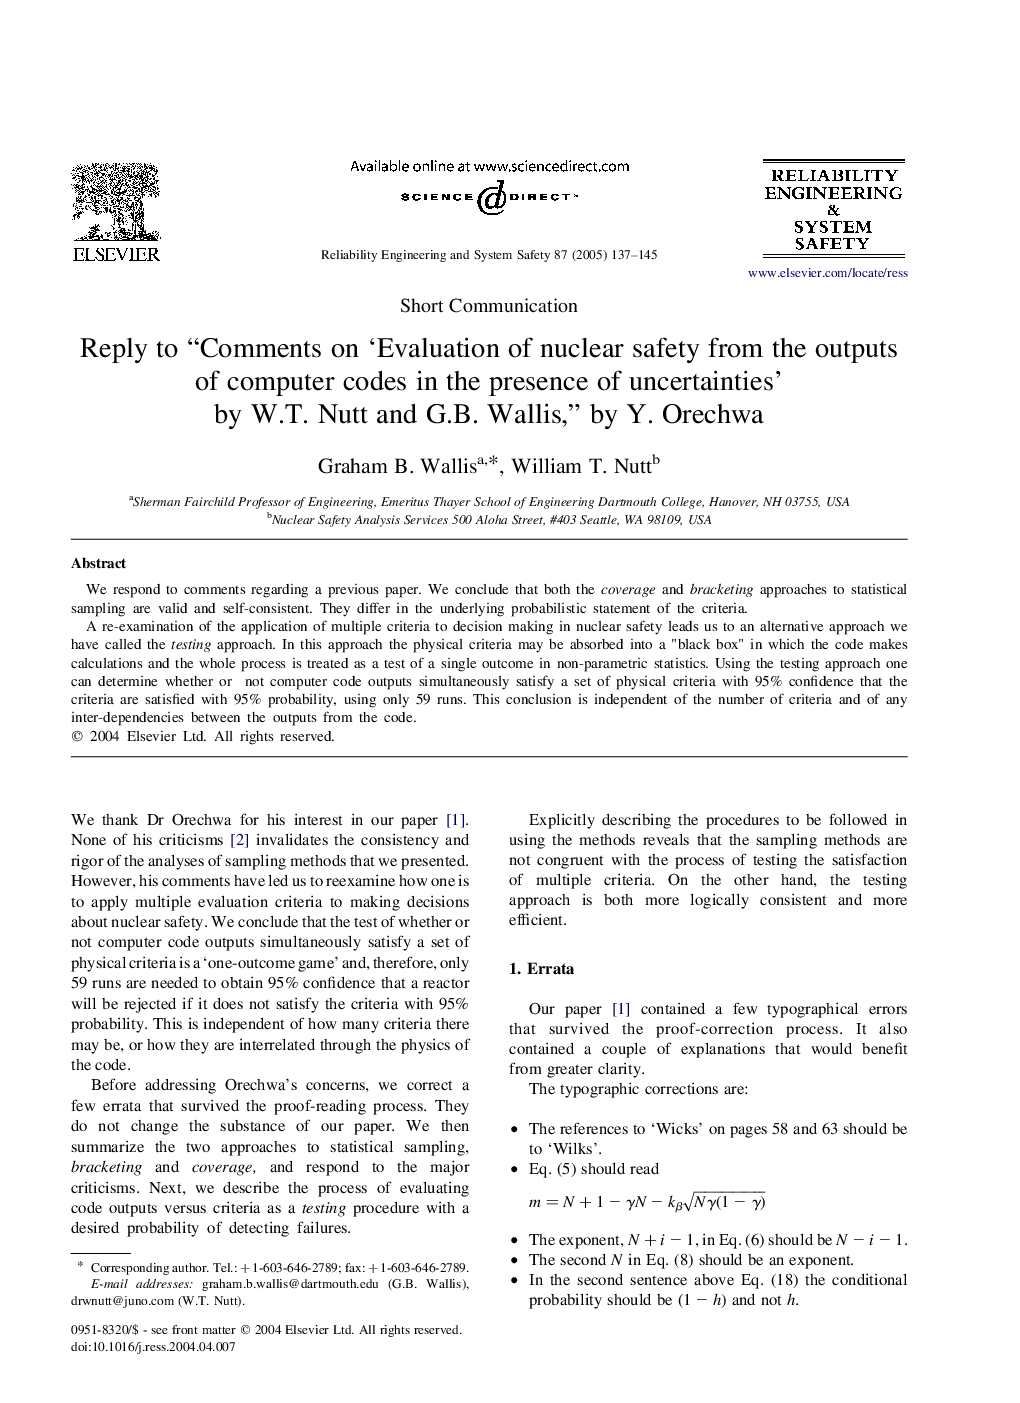 Reply to “Comments on 'Evaluation of nuclear safety from the outputs of computer codes in the presence of uncertainties' by W.T. Nutt and G.B. Wallis,” by Y. Orechwa